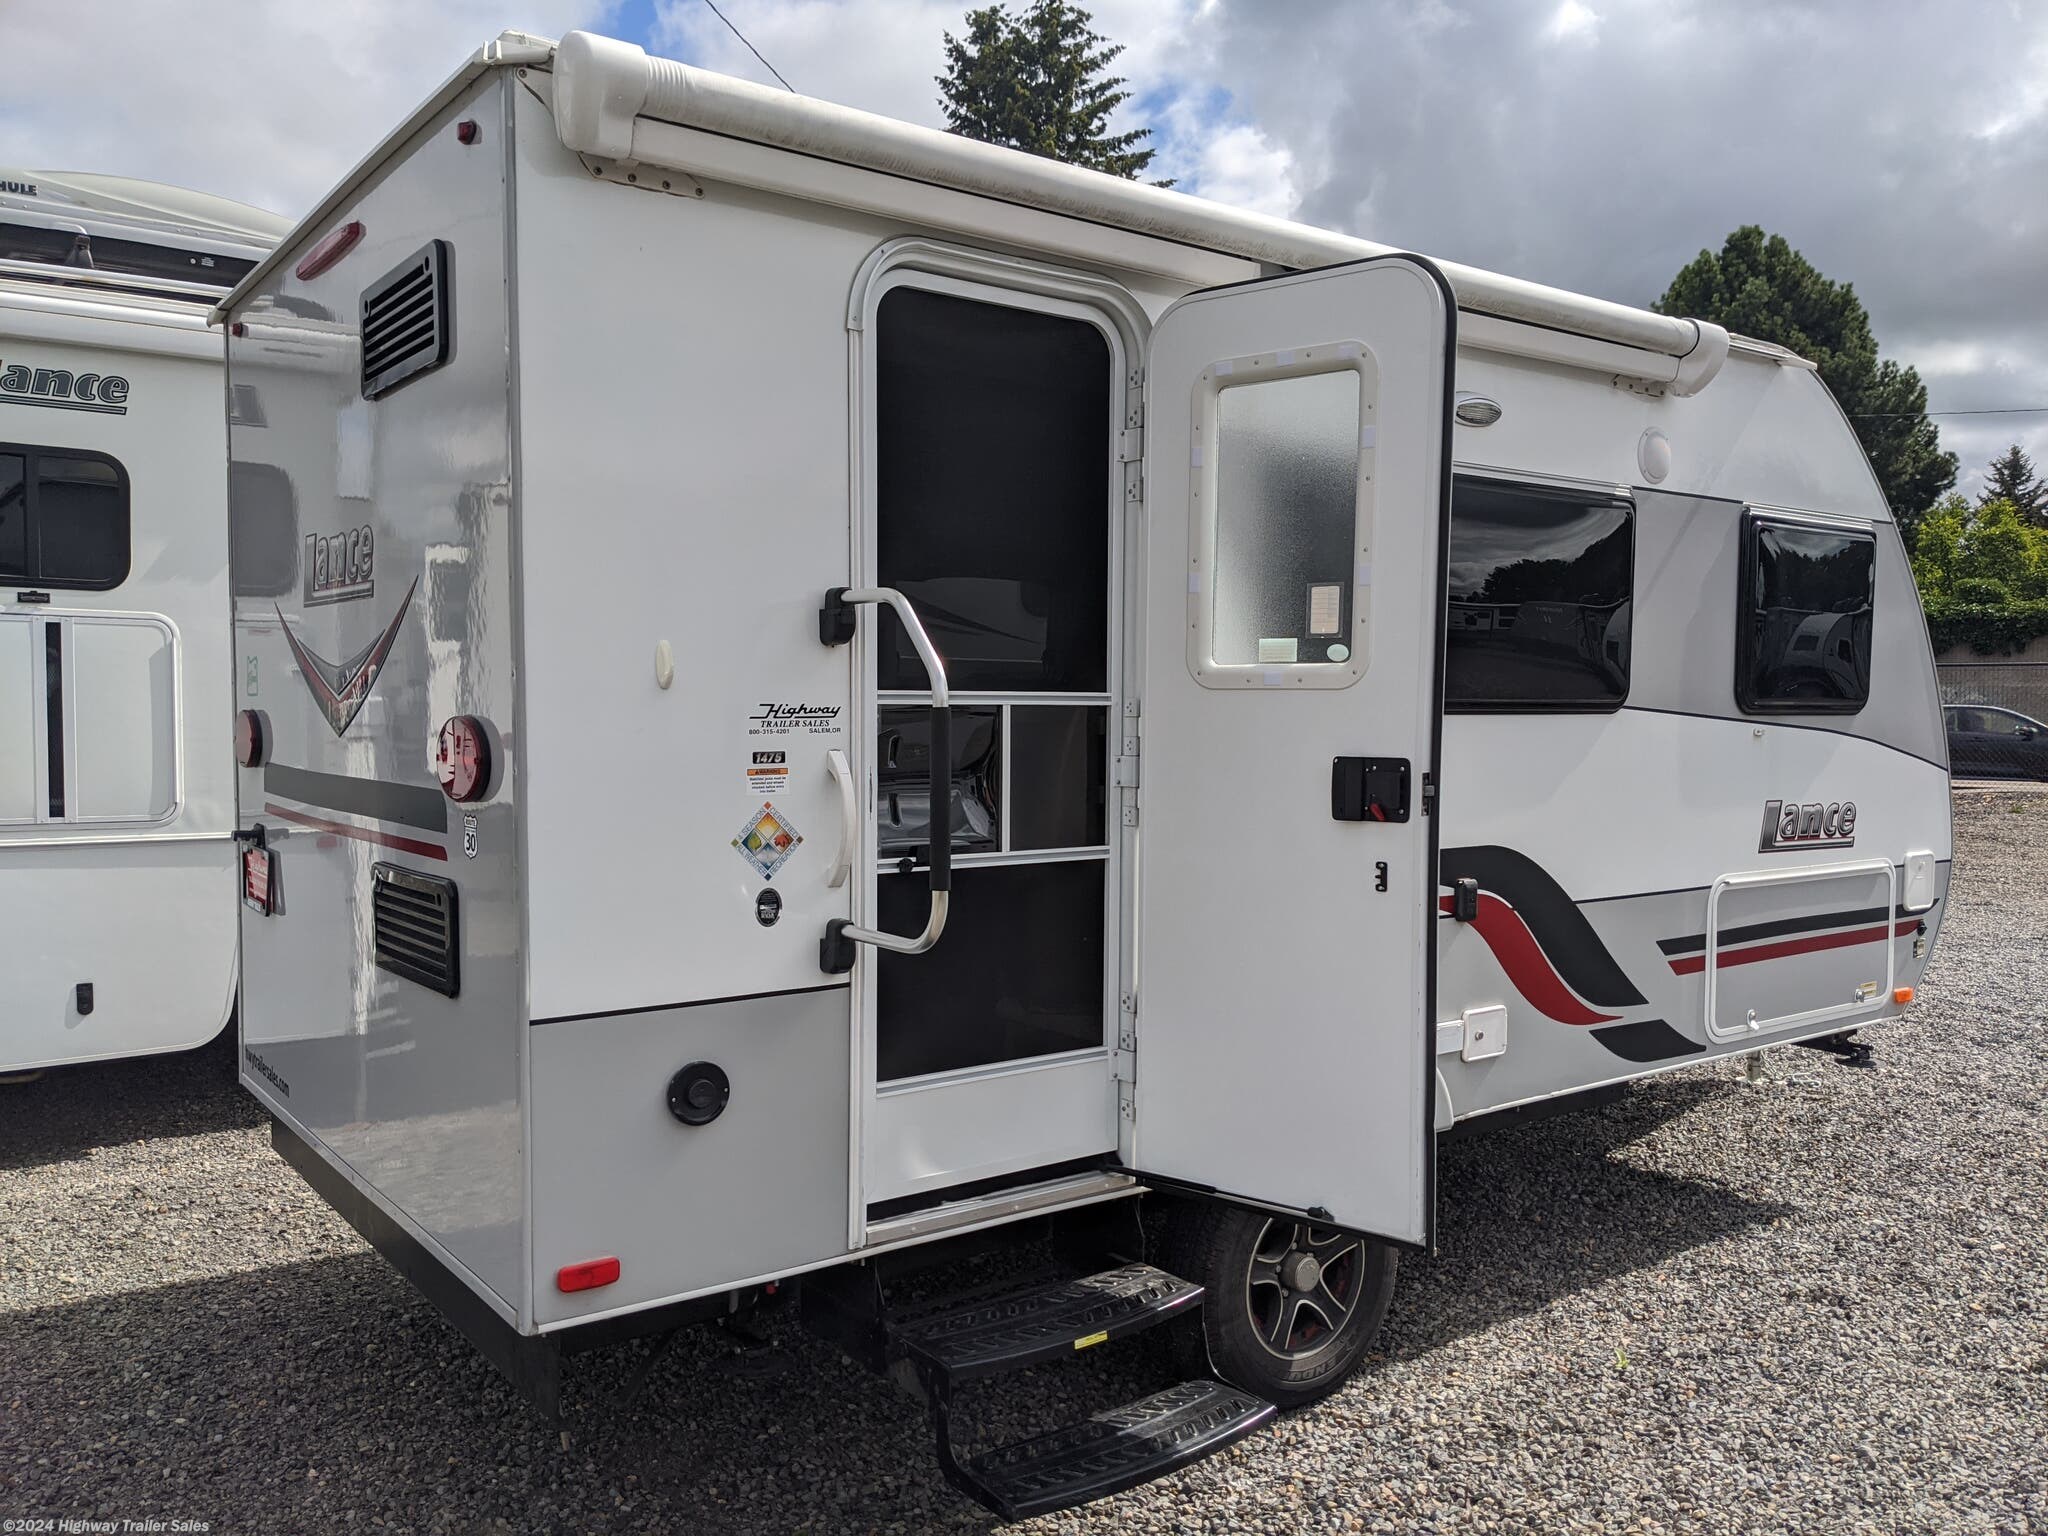 2019 Lance TT 1475 RV for Sale in Salem, OR 97305 6950A